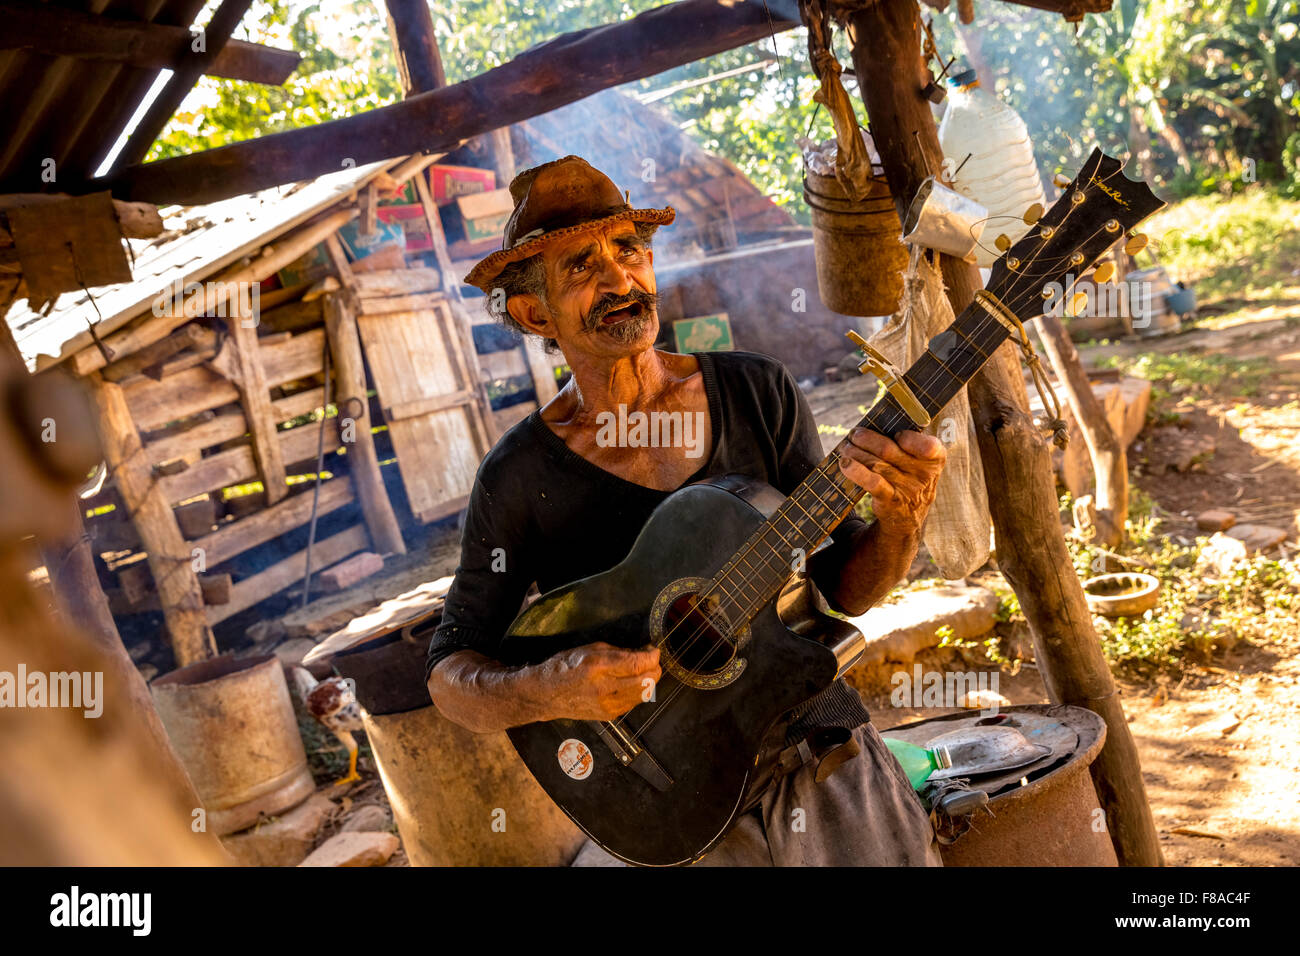 Sugarcane farmers in the Valle de los Ingenios playing guitar and singing for tourists, leather hat, old man, Trinidad, Cuba, Stock Photo